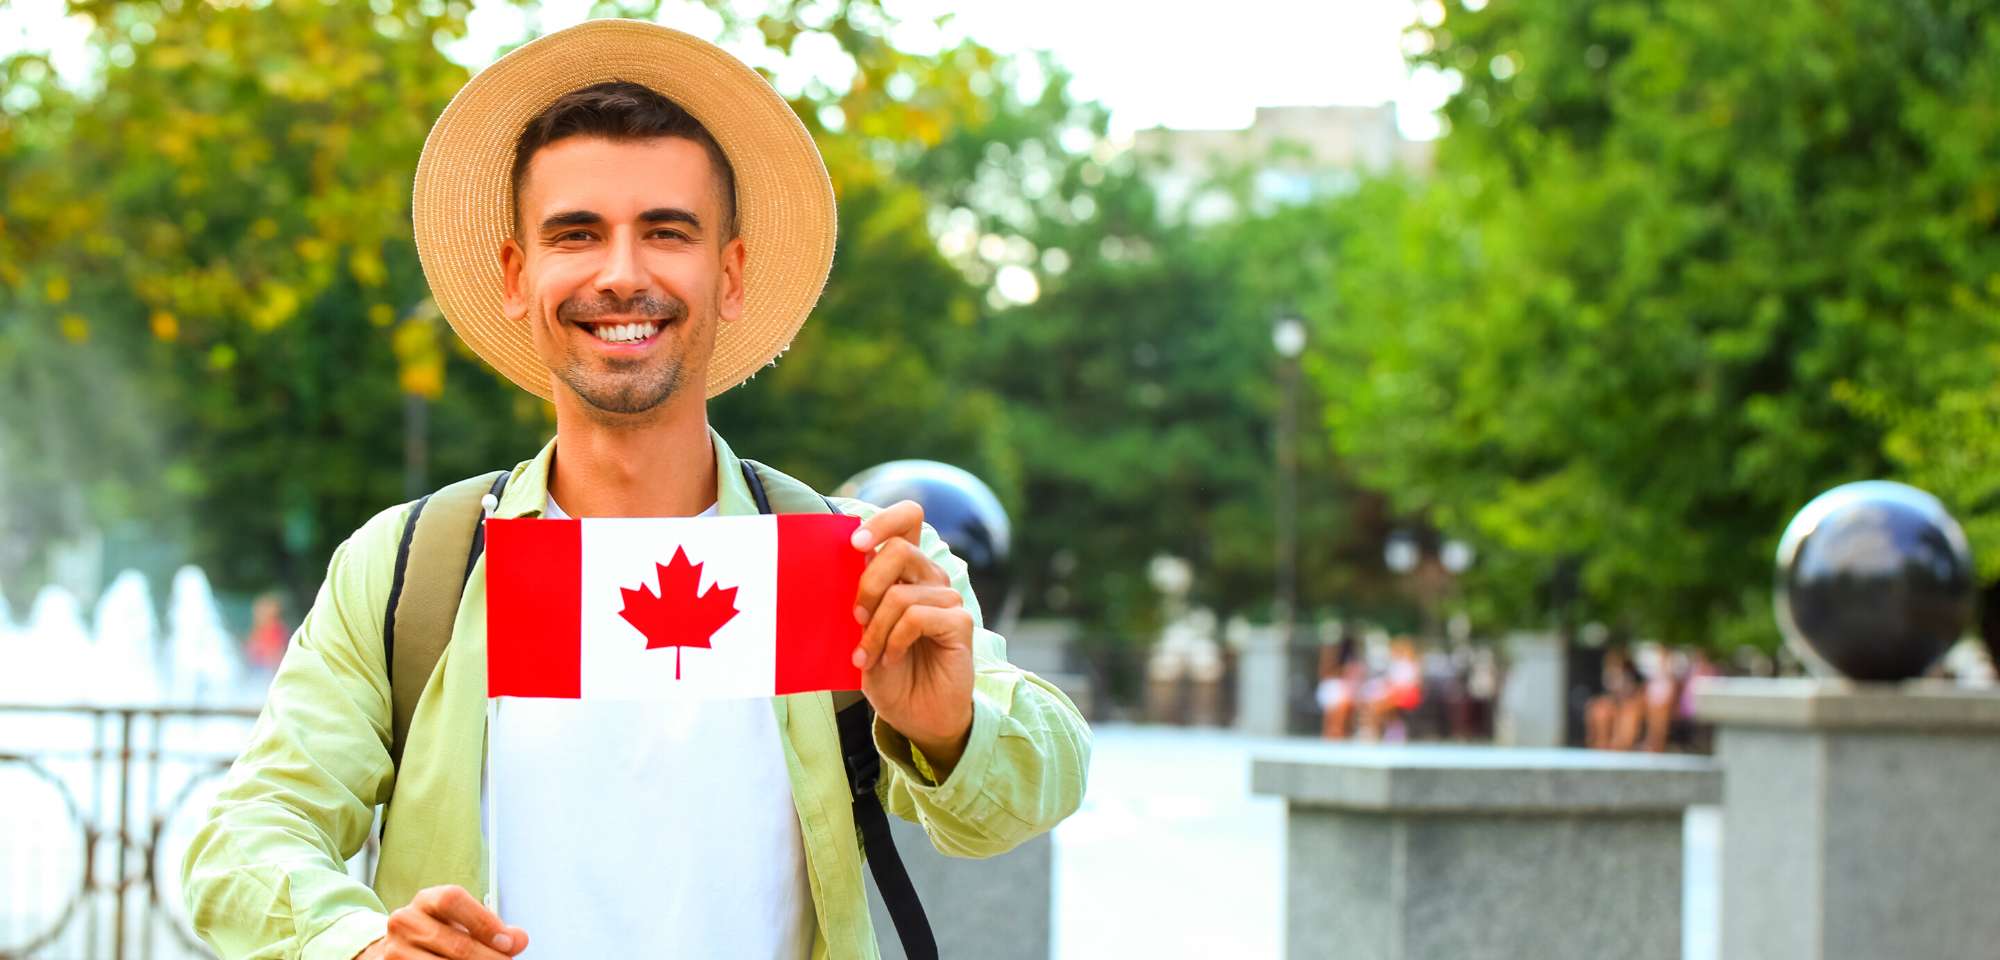 Are you ready to live in Canada?